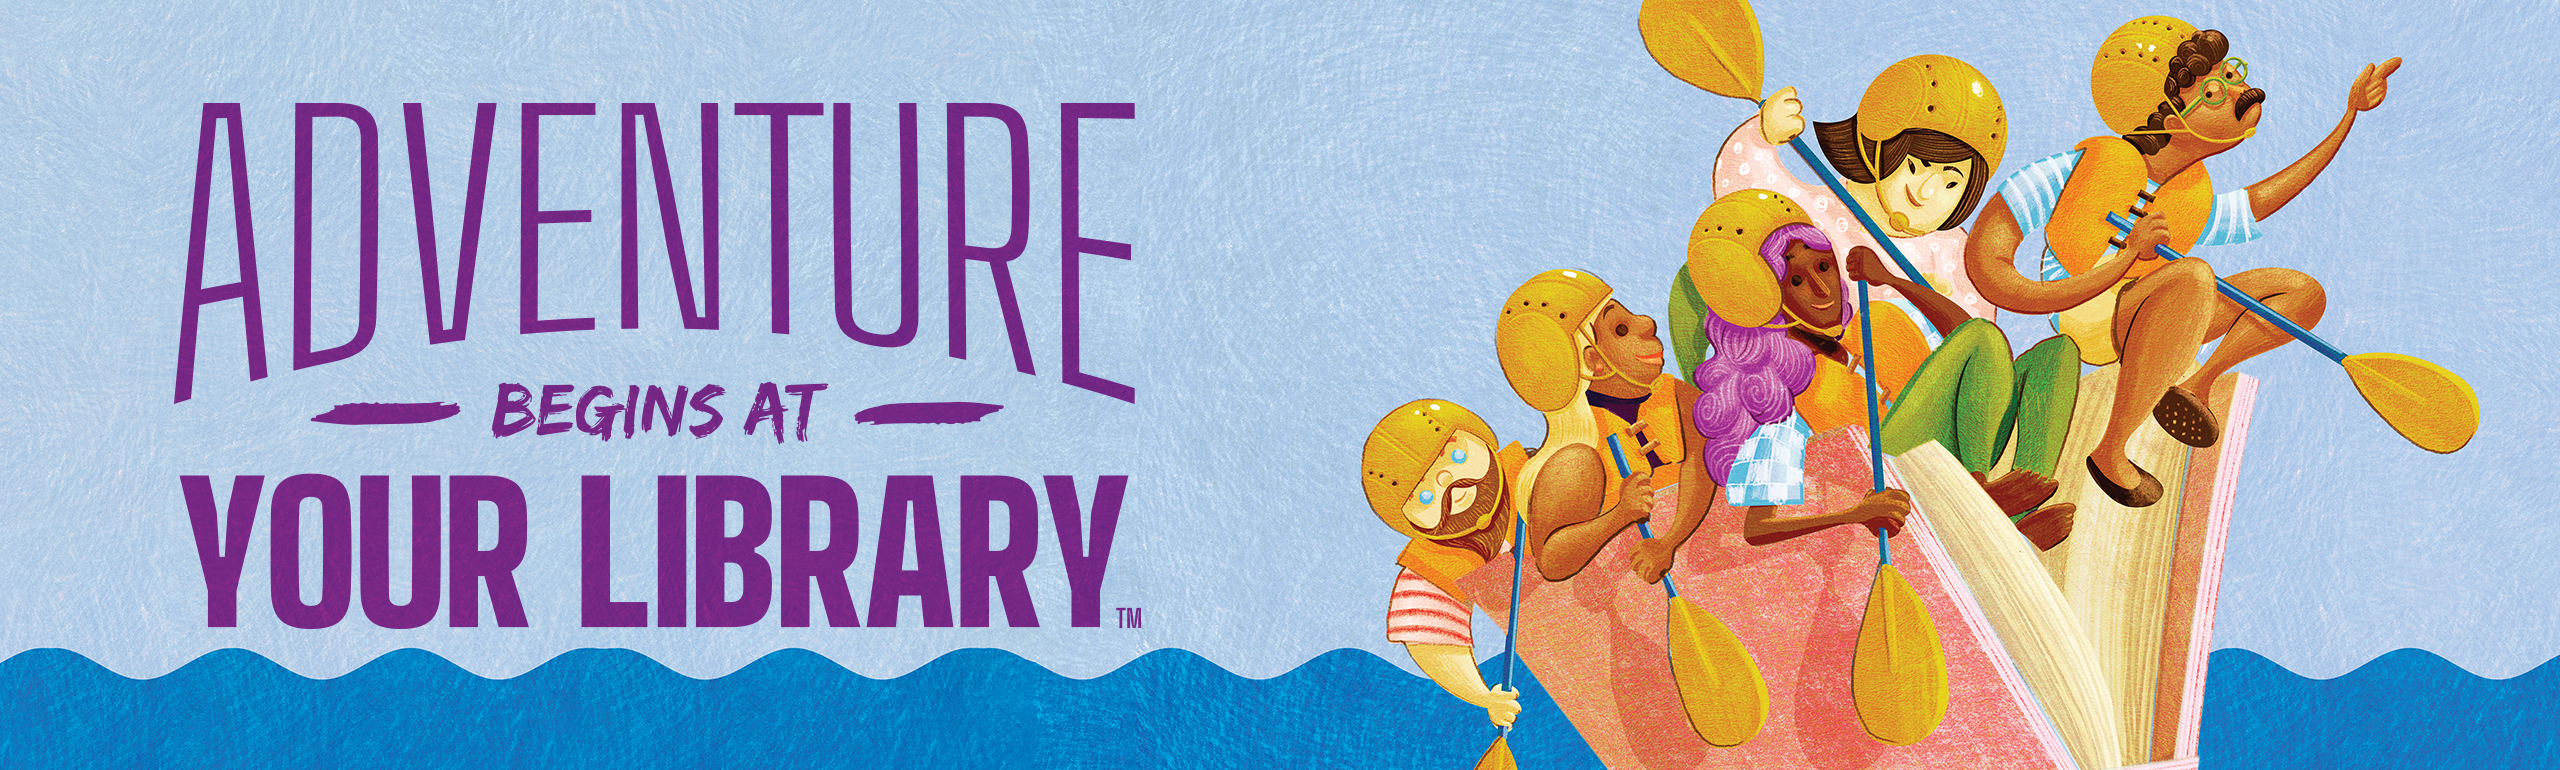 Banner for "Adventure Begins at your Library" showing people floating on a book in water, as if the book were a raft